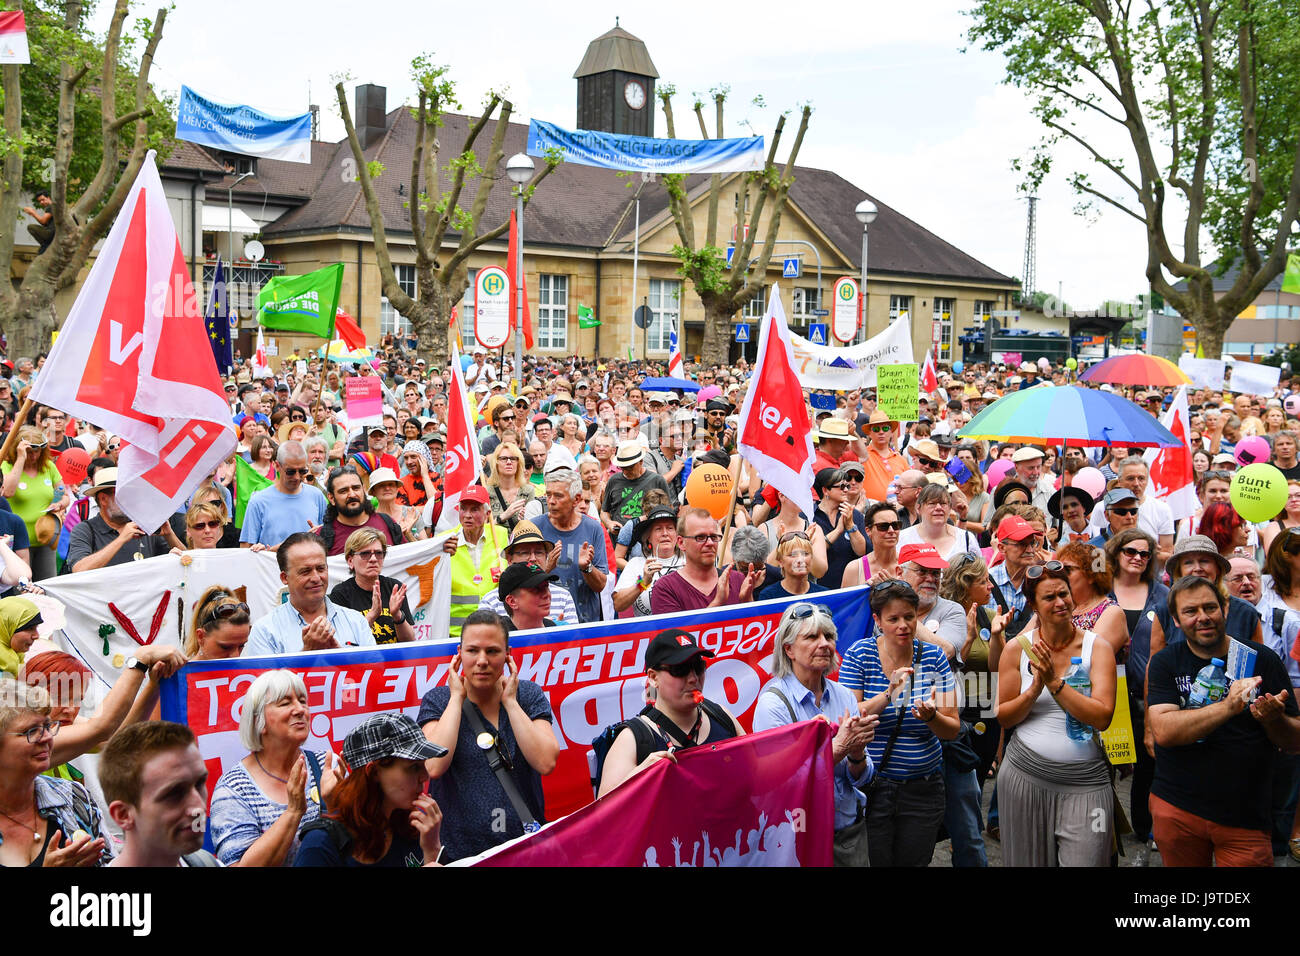 Karlsruhe, Germany. 3rd June, 2017. People participate in a counter demonstration against a demonstration of right-wing extremists in Karlsruhe, Germany, 3 June 2017. The rightist party 'Die Rechte' called out for the 'Tag der deutschen Zukunft' (lit. 'Day of German future'). More than 6,000 participants are expected at multiple counter-demonstrations. Photo: Uwe Anspach/dpa/Alamy Live News Stock Photo